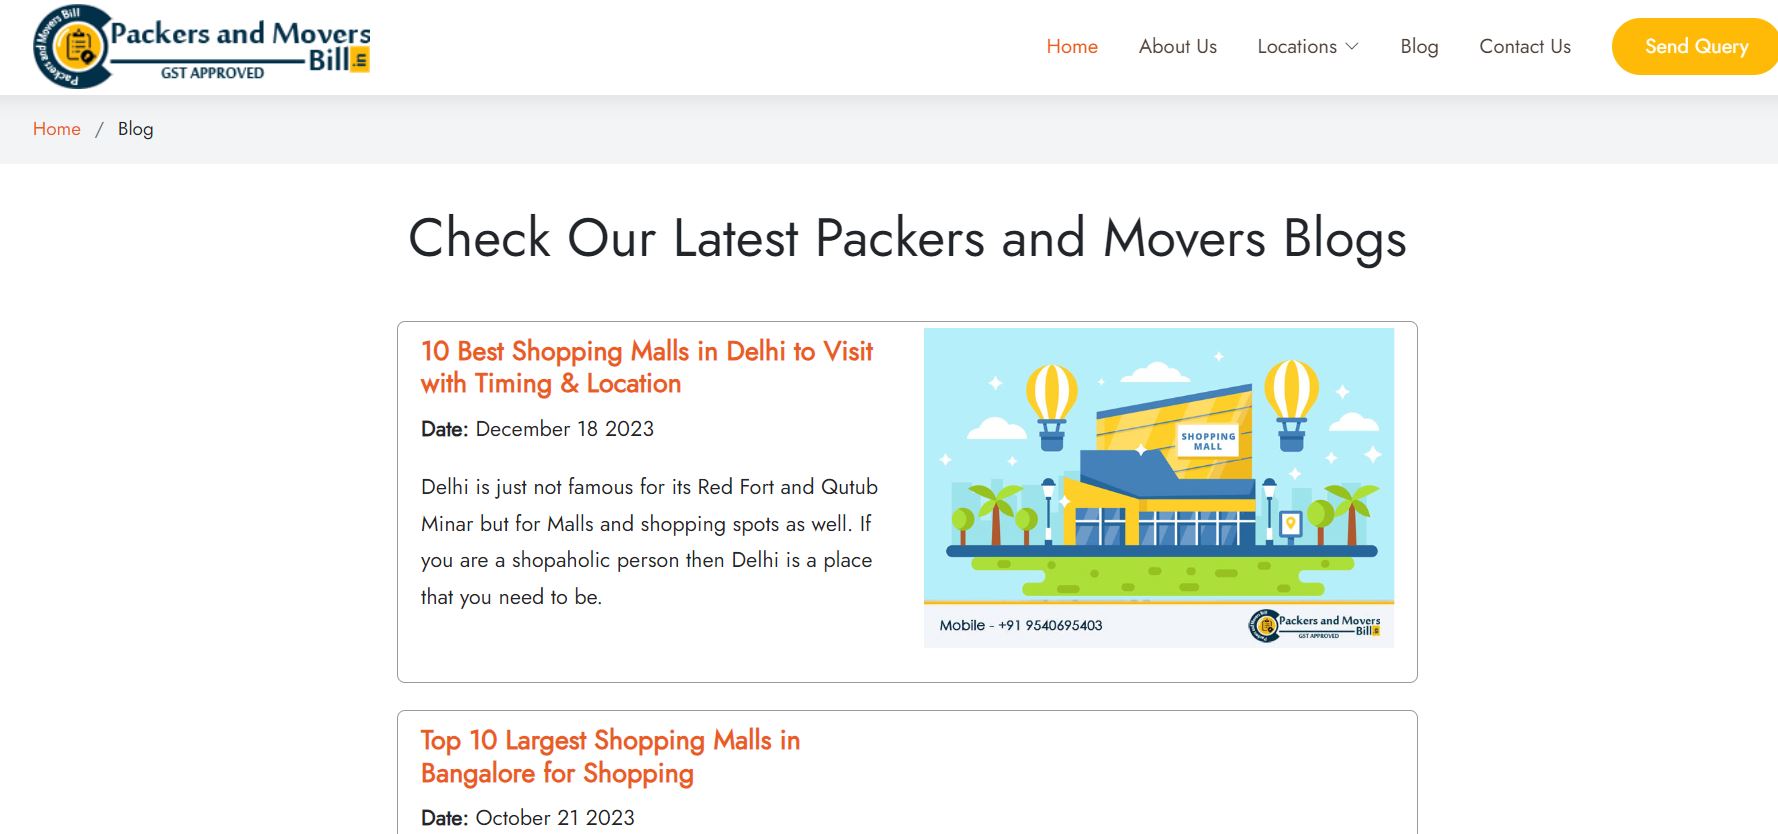 Packers and Movers Bill Blog